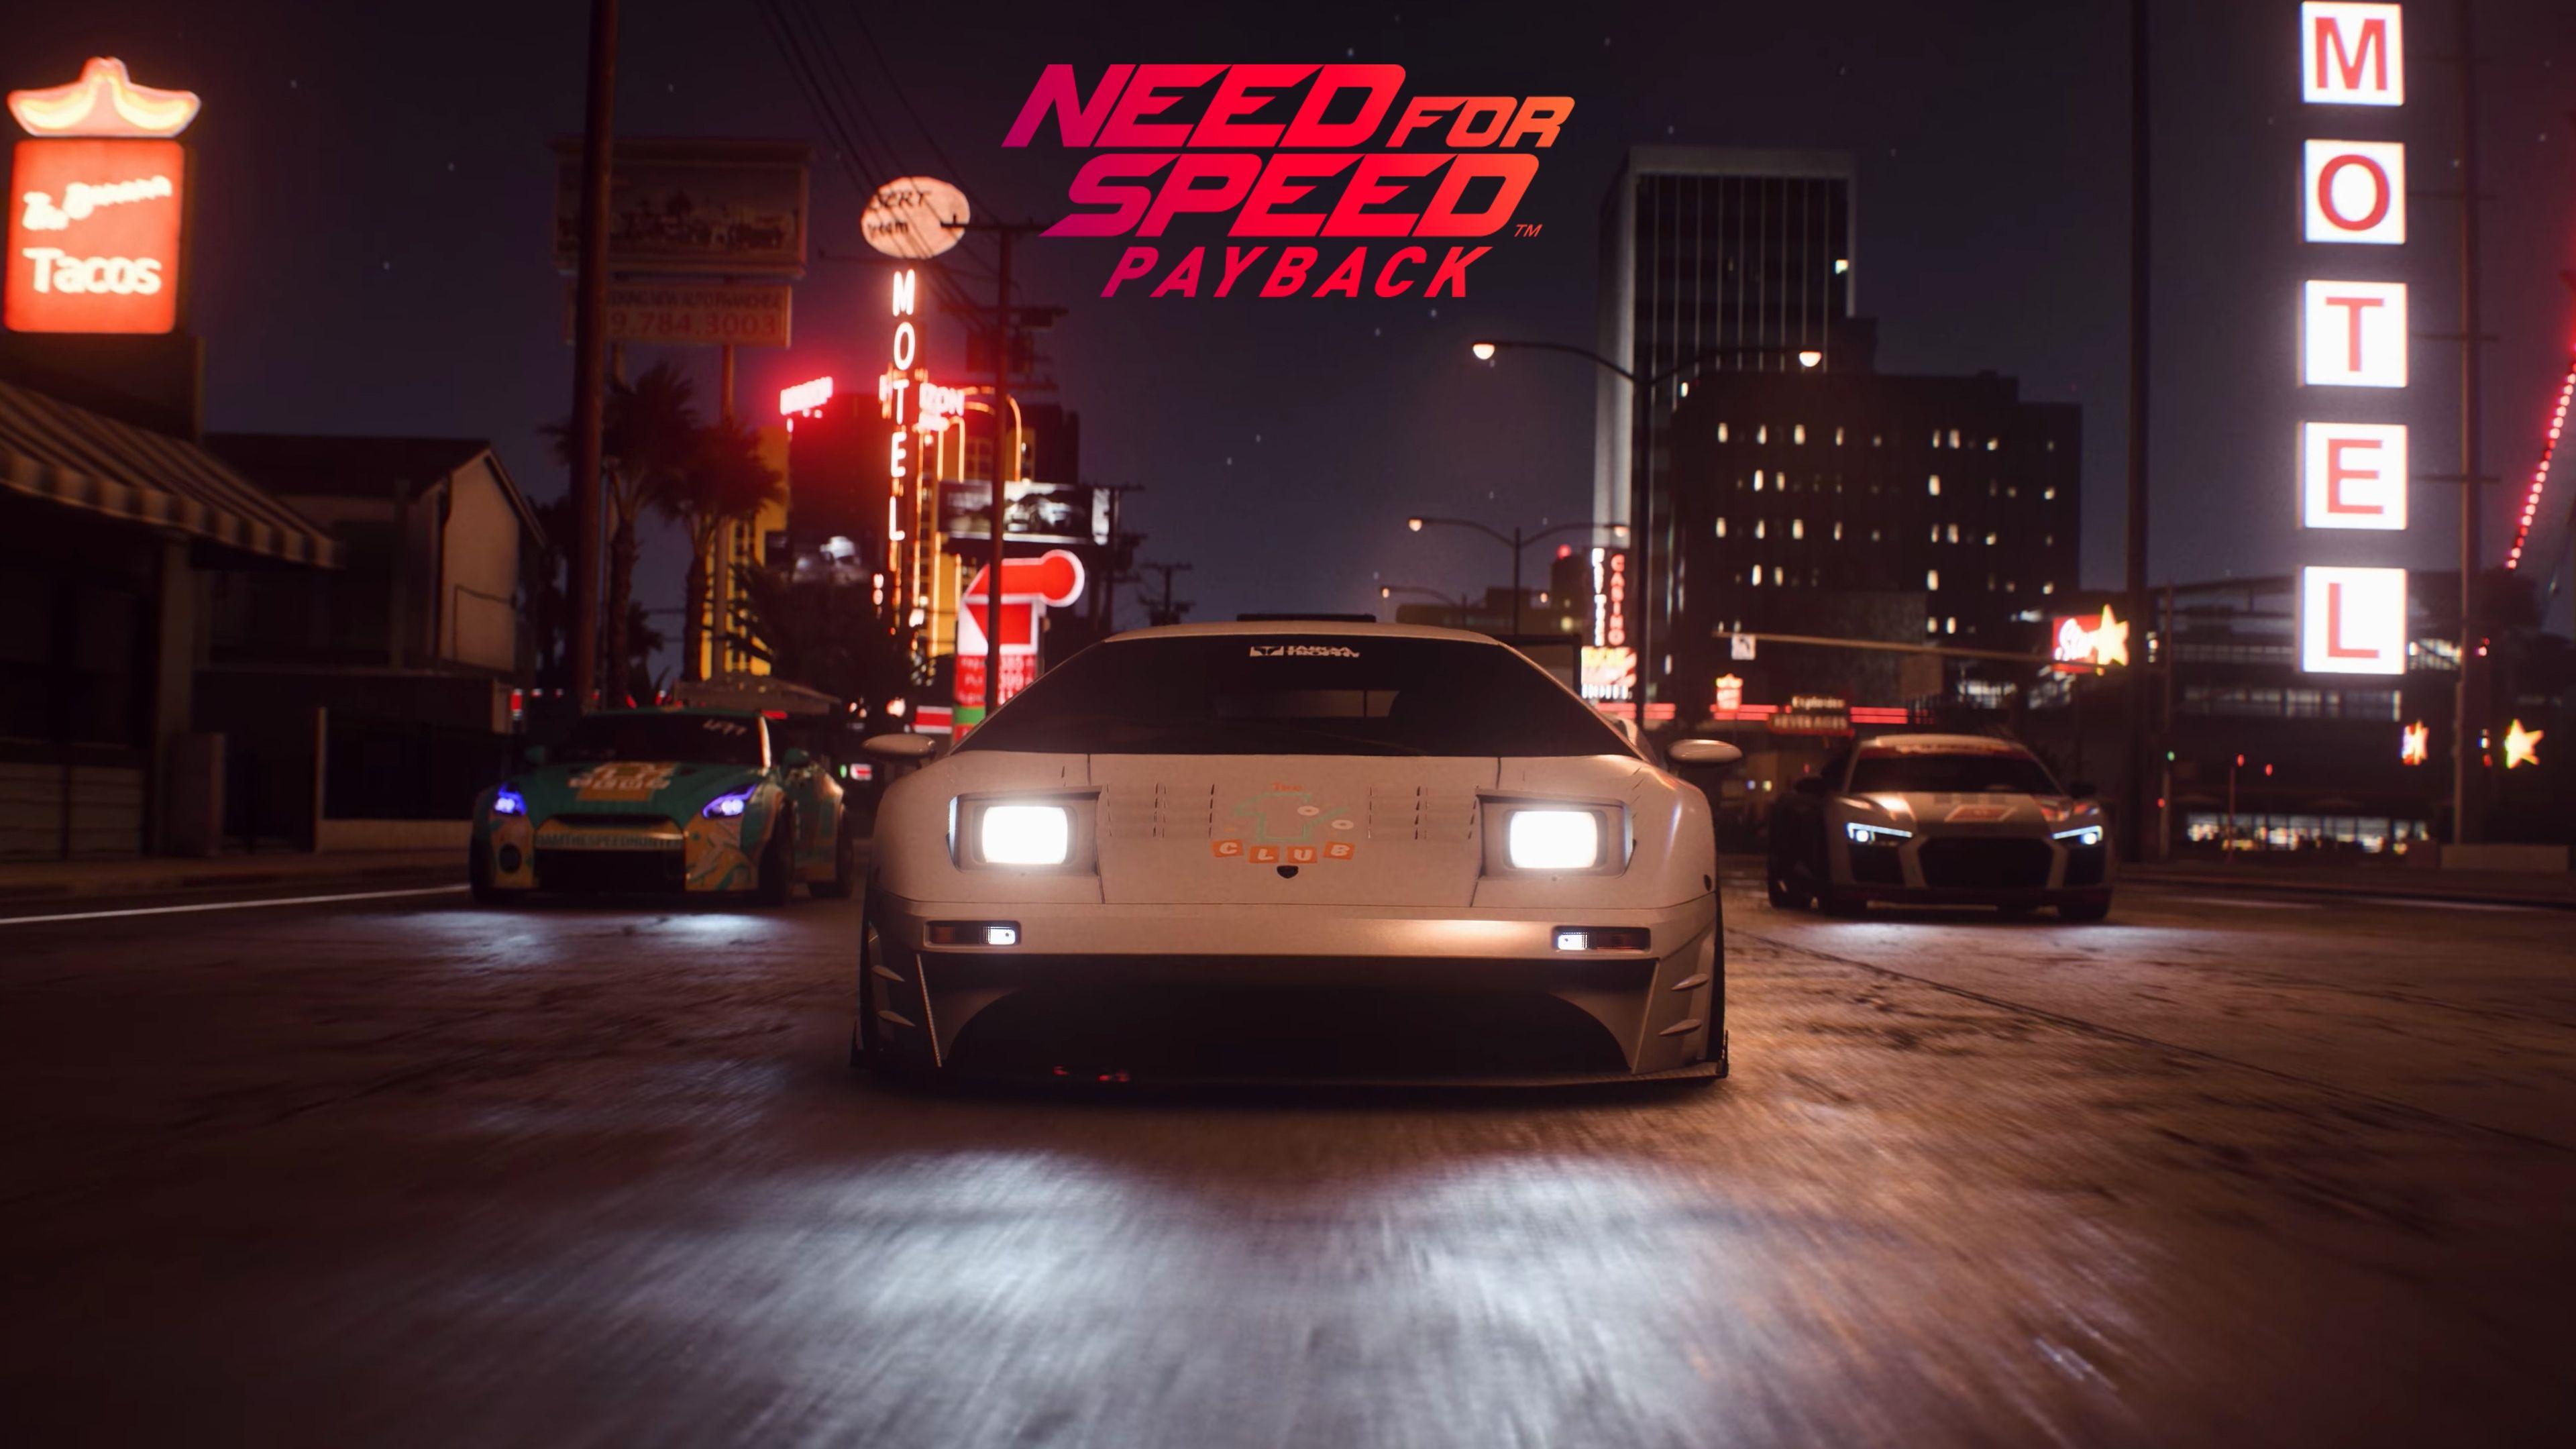 reach a multiplier of 2 need for speed payback